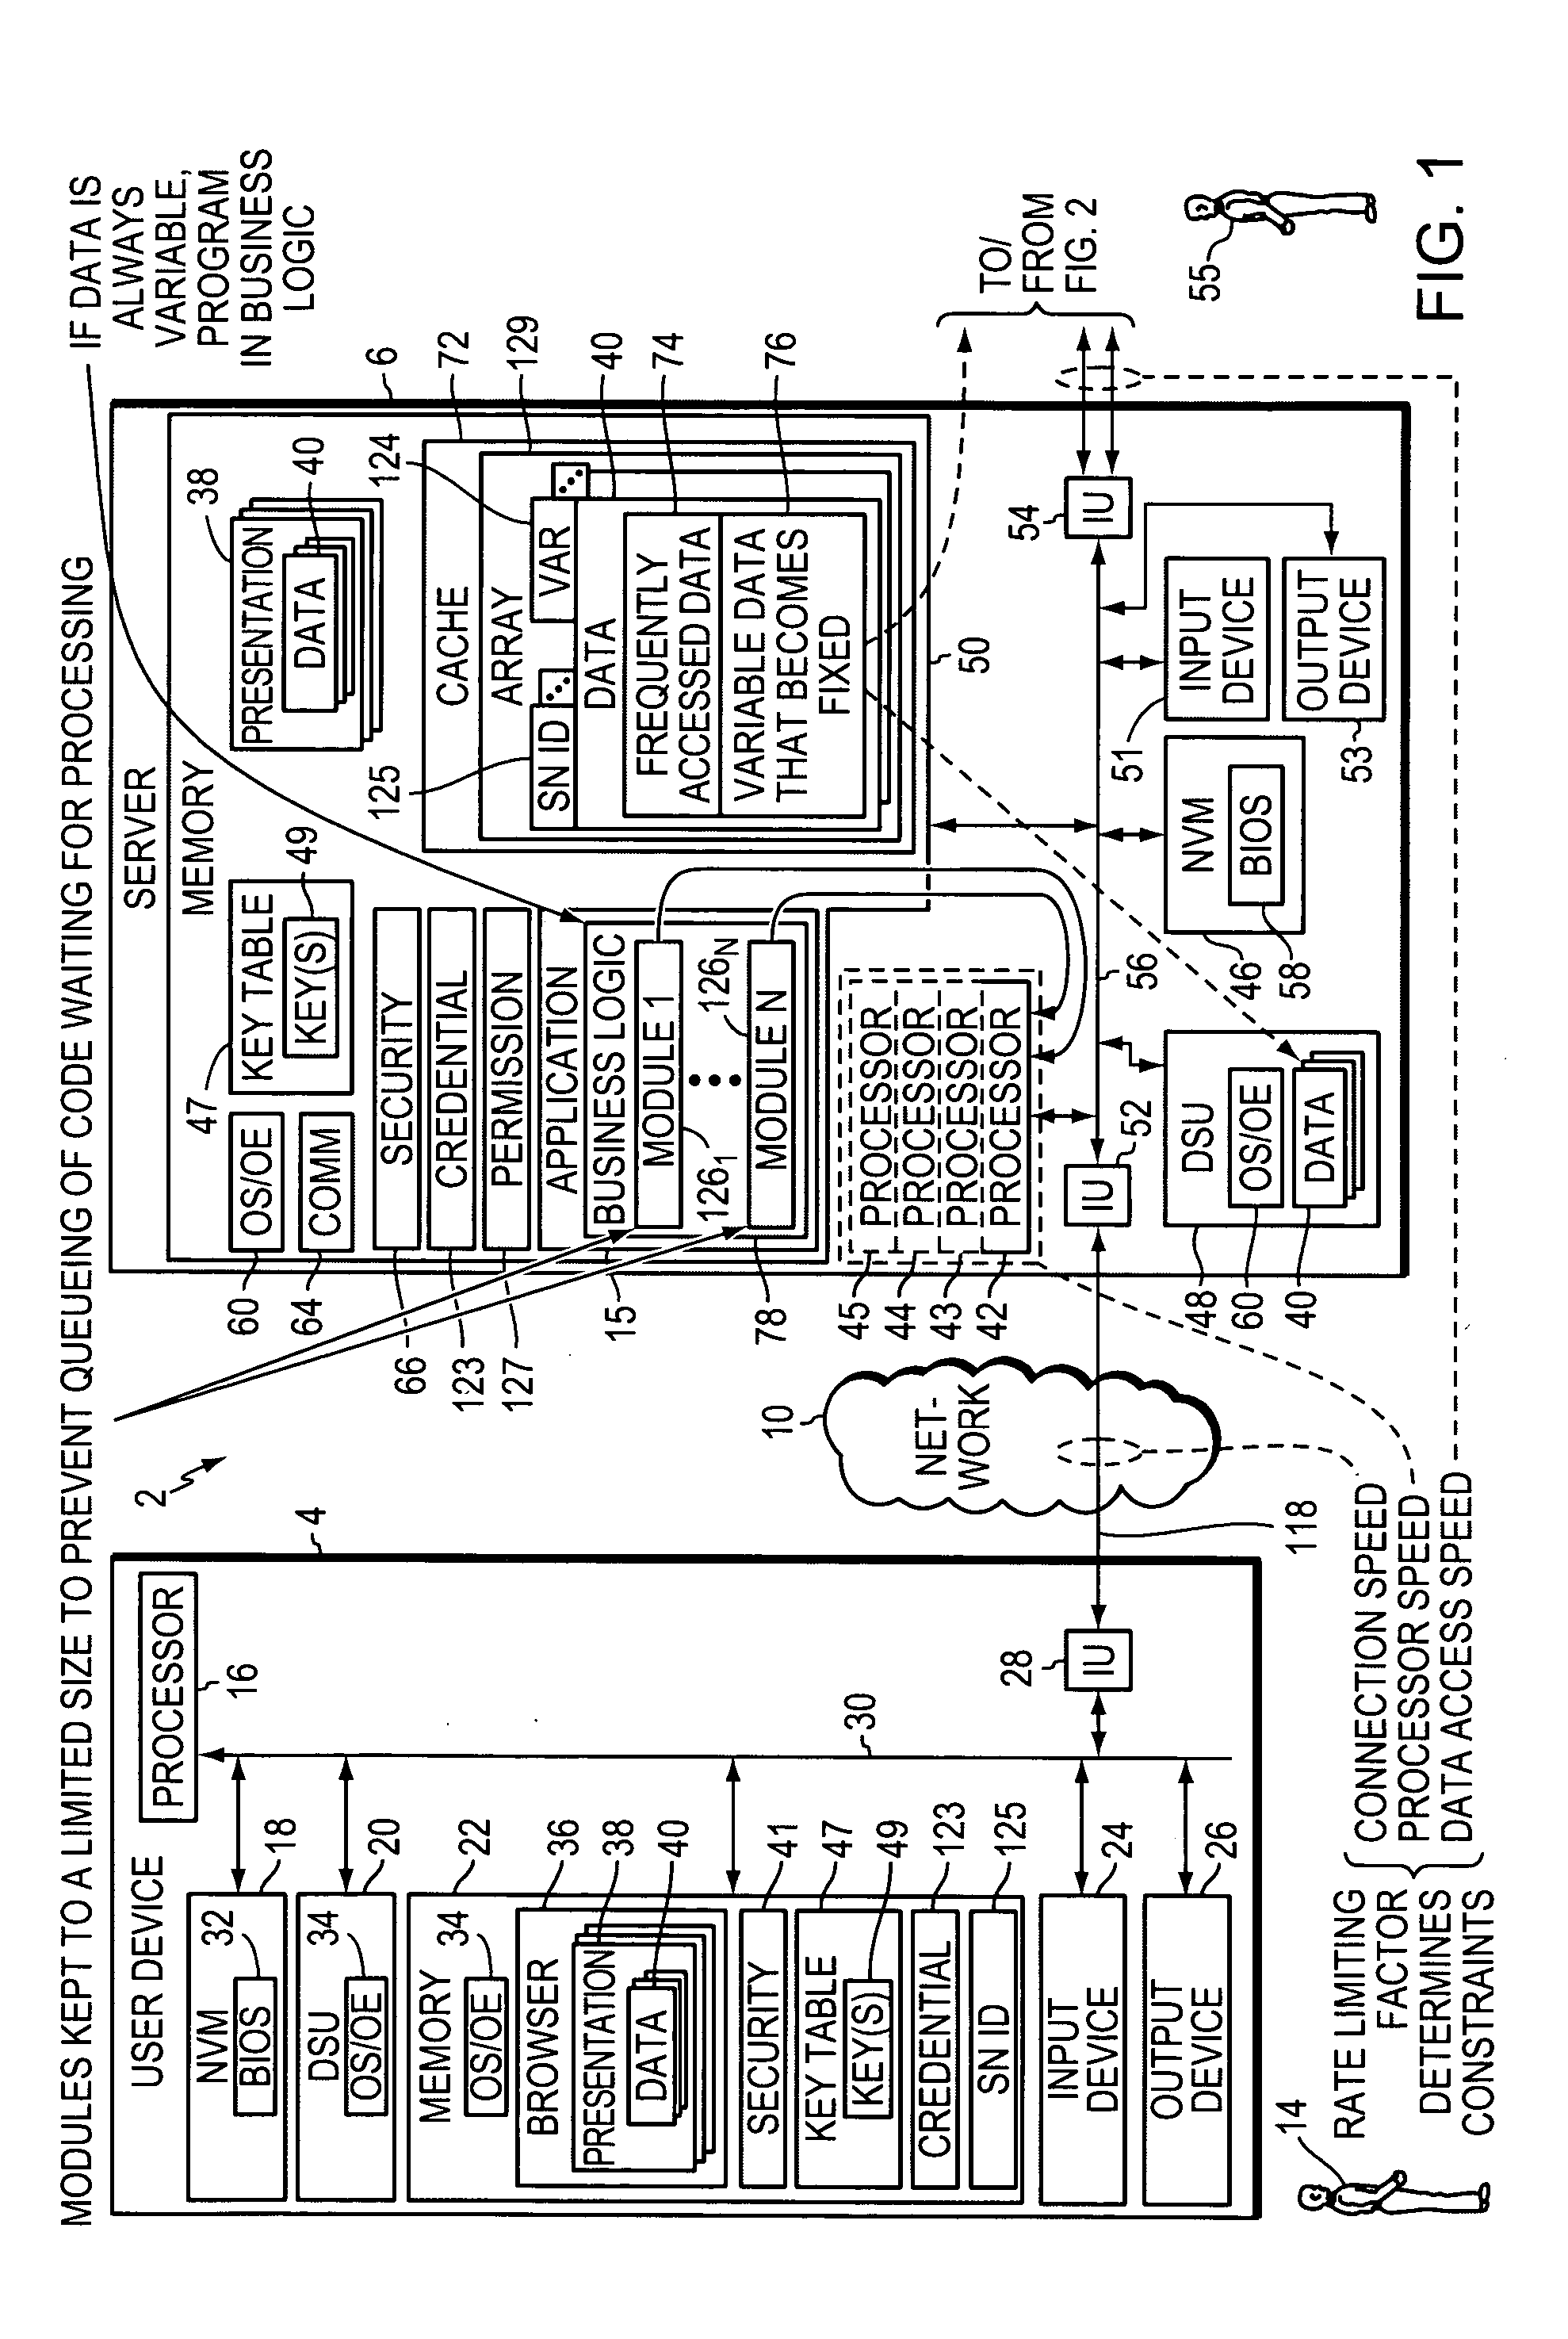 Methods, apparatuses, systems, and articles for determining and implementing an efficient computer network architecture